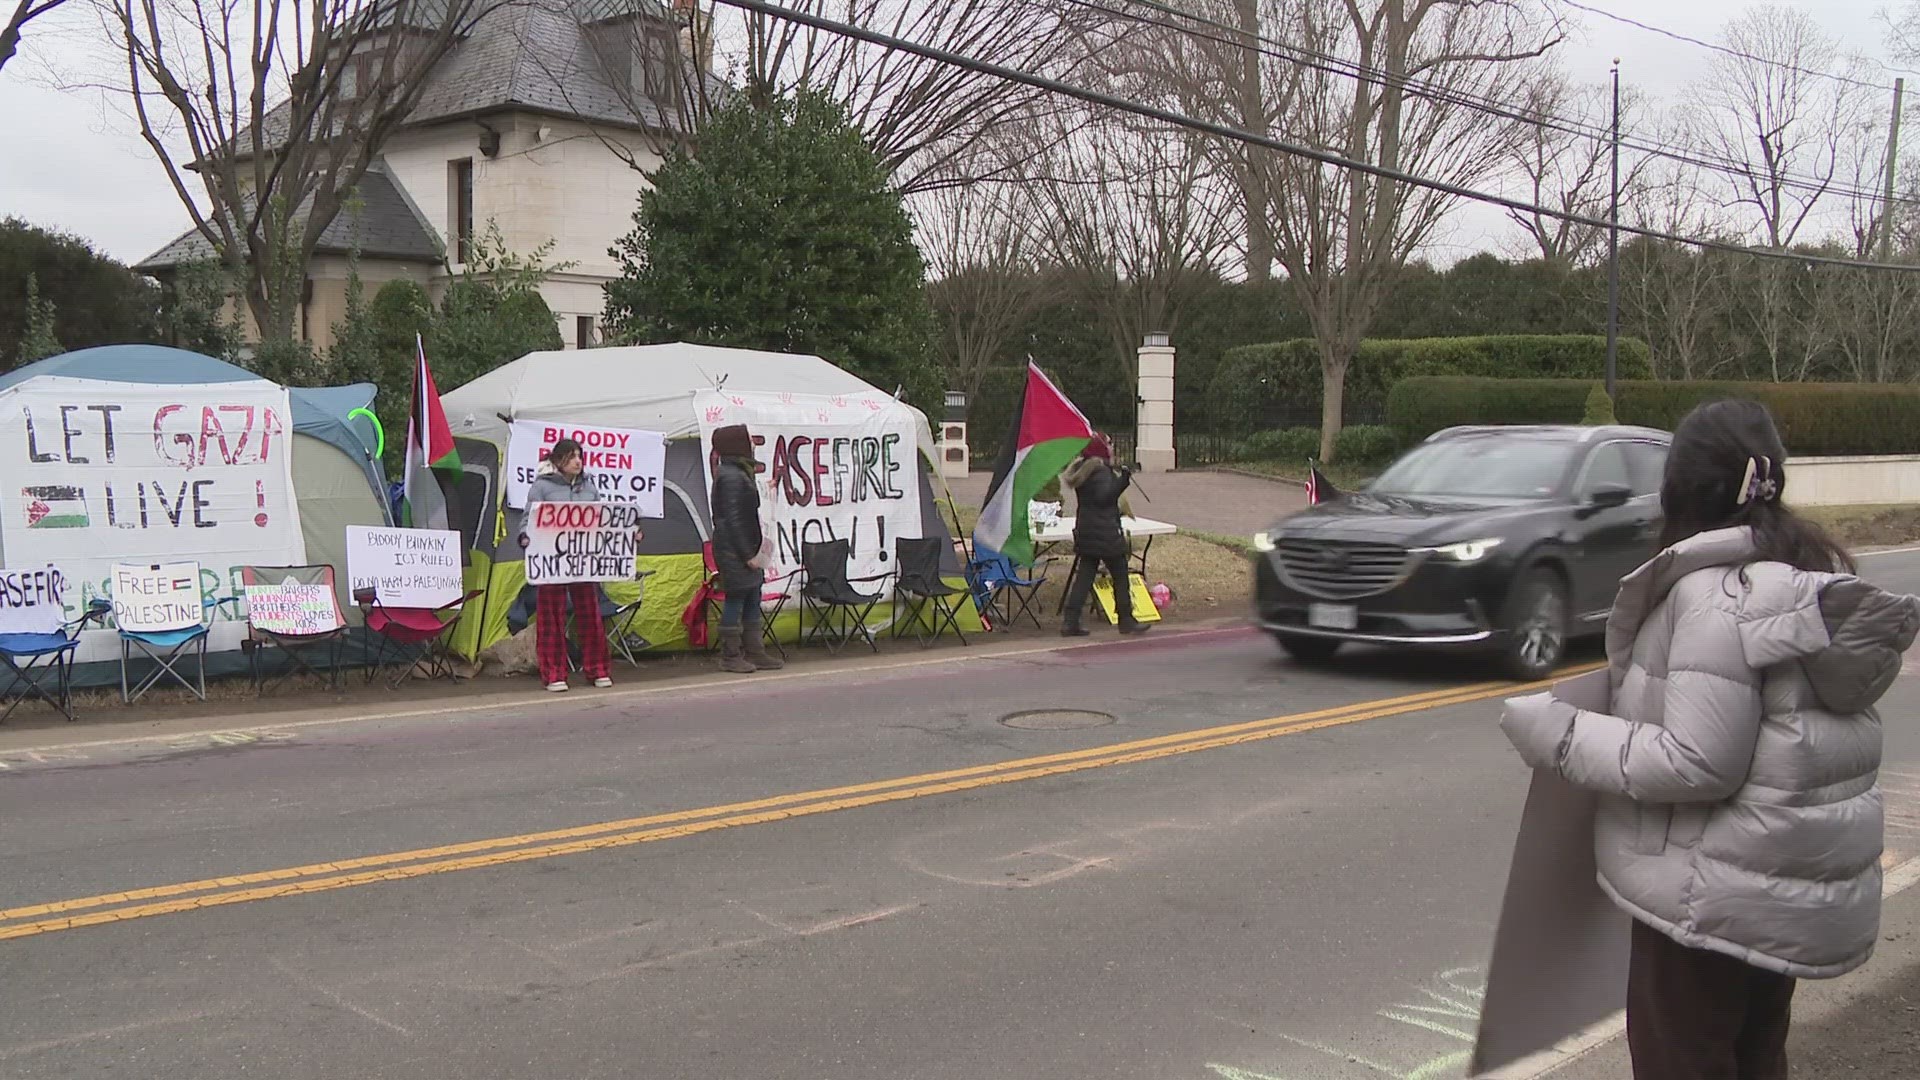 A group of pro-Palestinian protesters demanding a ceasefire are getting a lot of attention from commuters in Northern Virginia.